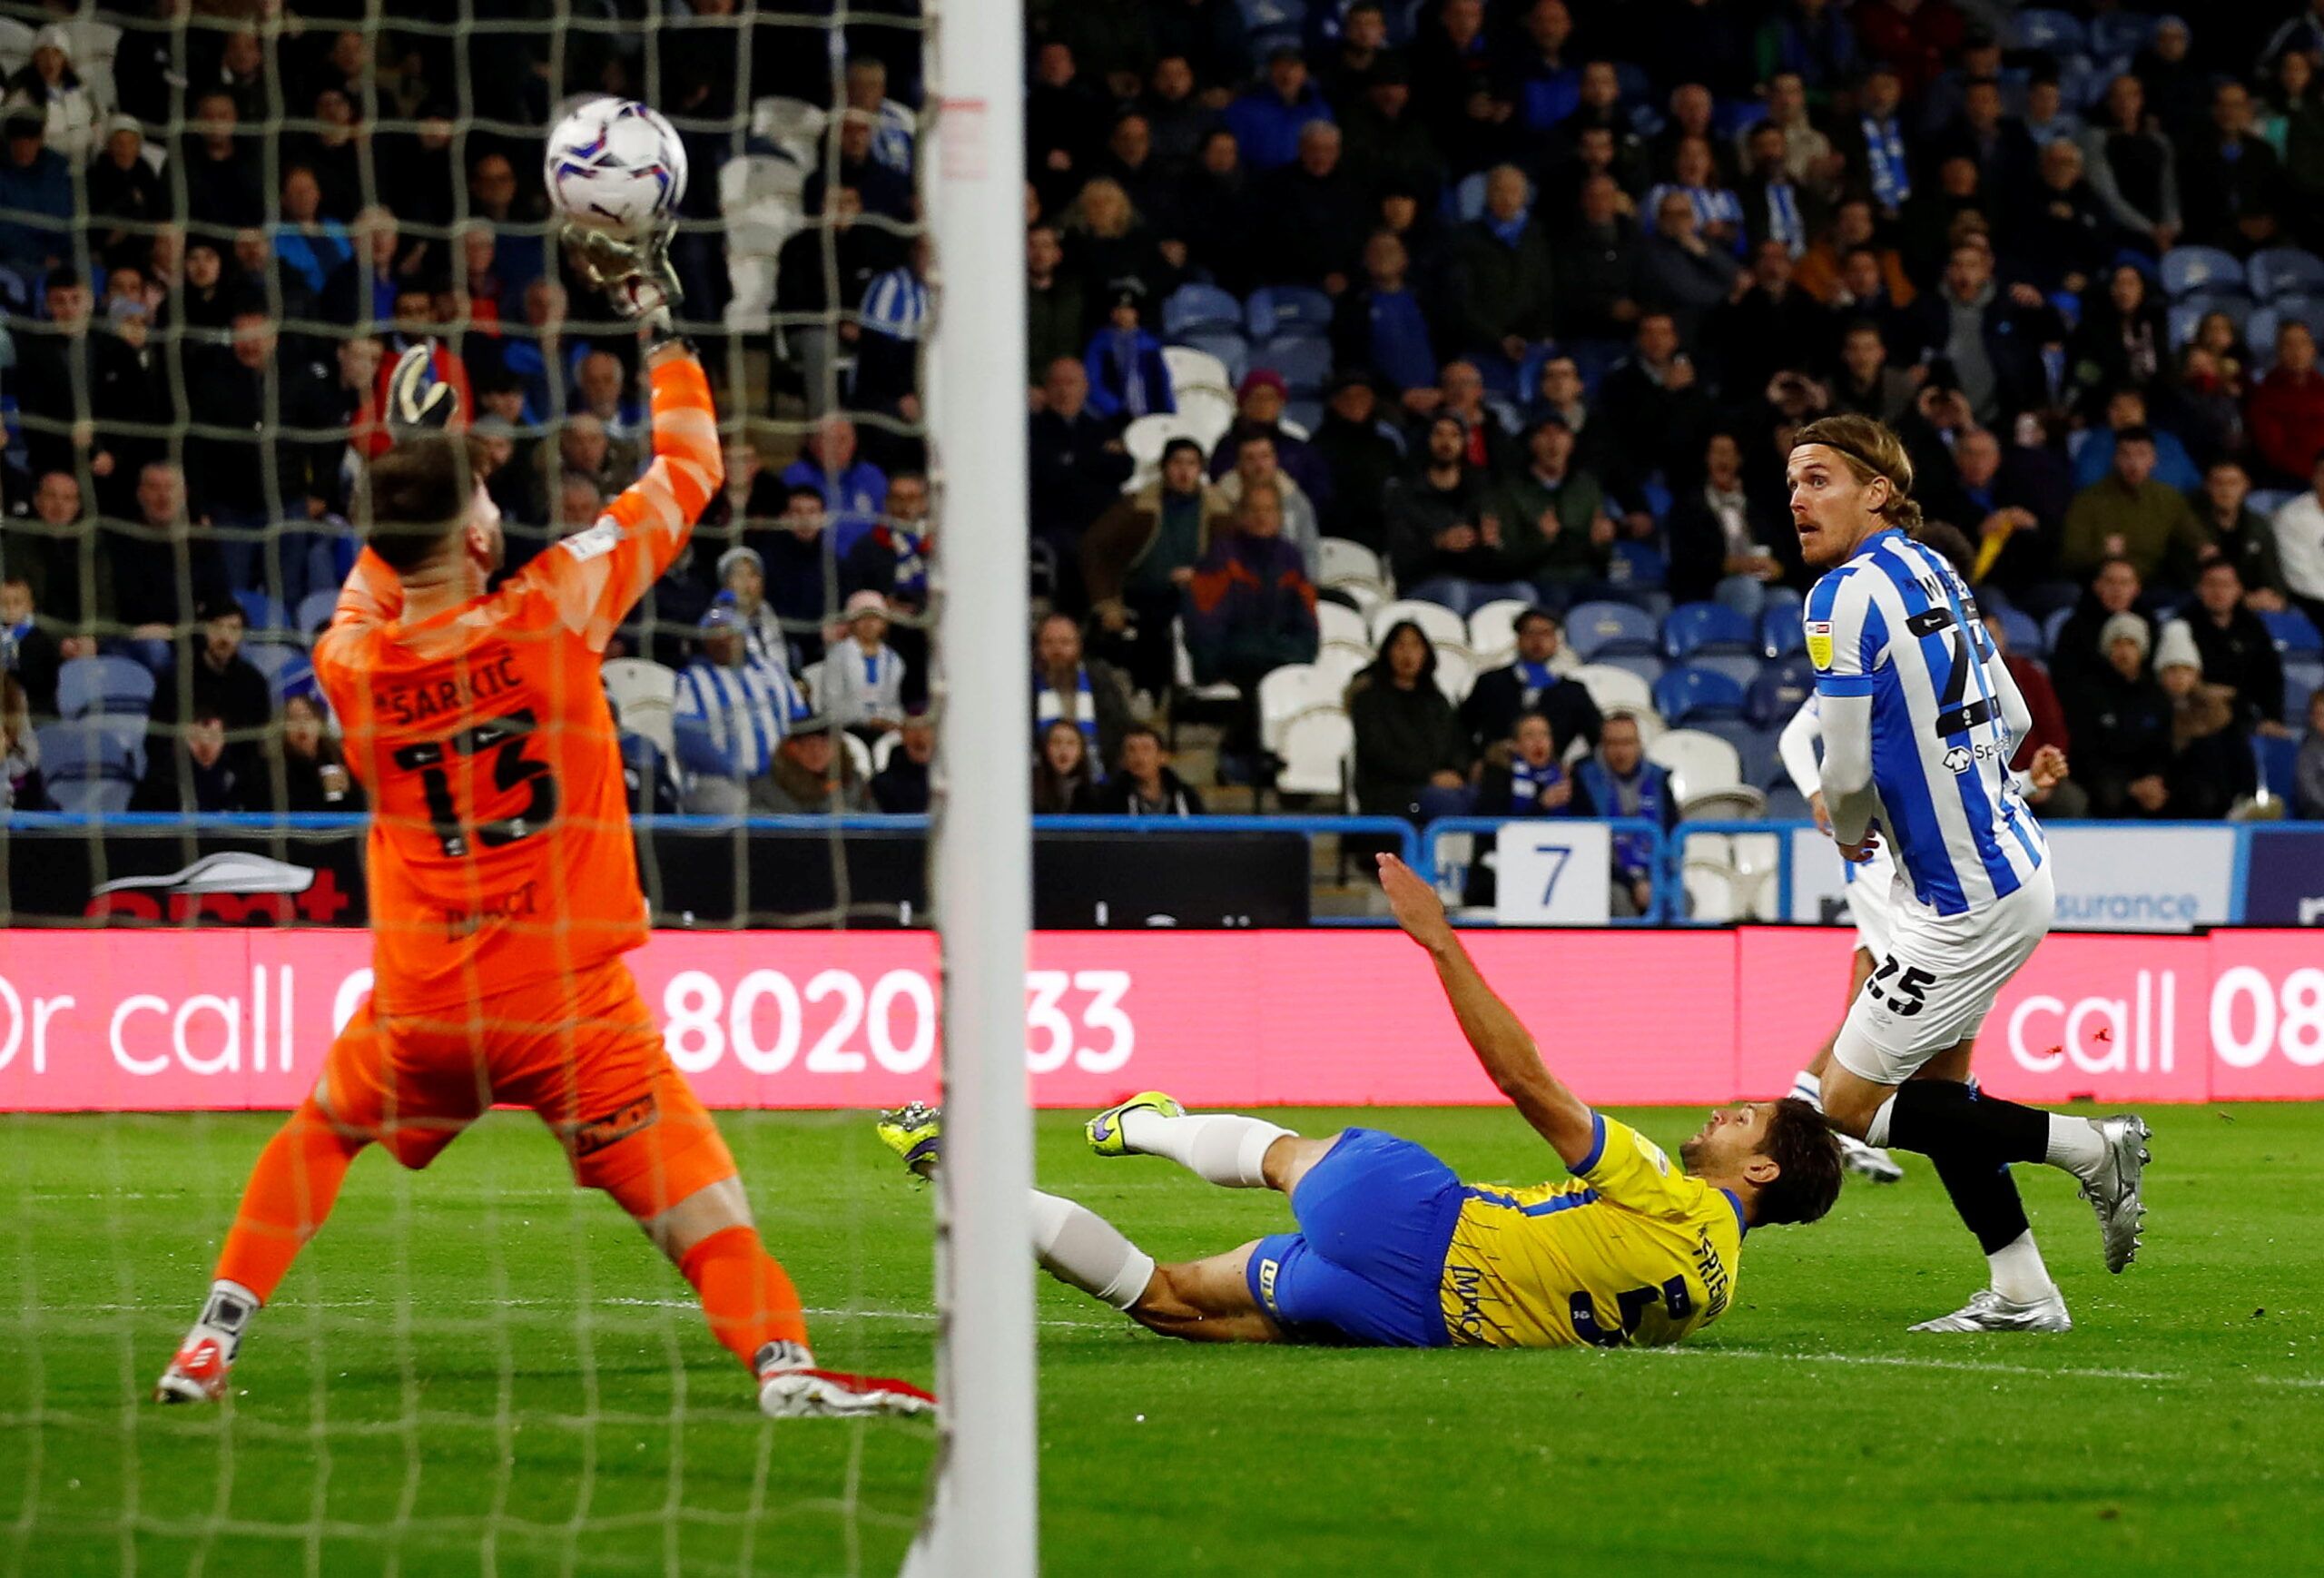 Soccer Football - Championship - Huddersfield Town v Birmingham City - John Smith's Stadium, Huddersfield, Britain - October 20, 2021  Birmingham City's Matija Sarkic makes a save from Huddersfield Town's Danny Ward  Action Images/Jason Cairnduff  EDITORIAL USE ONLY. No use with unauthorized audio, video, data, fixture lists, club/league logos or 